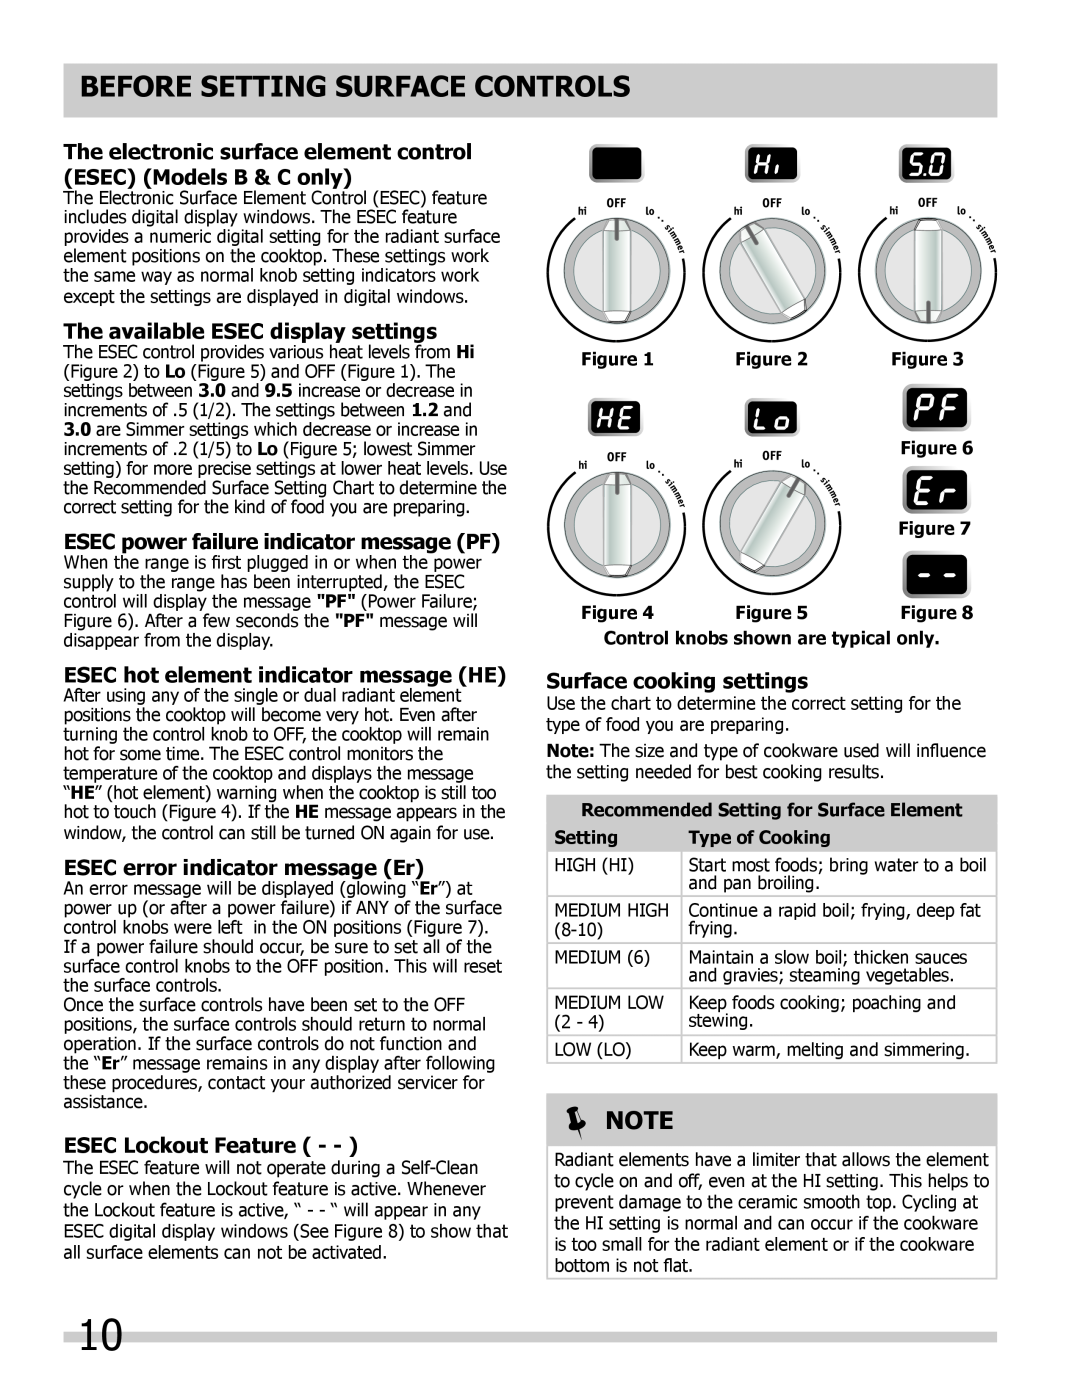 Frigidaire 318205804 The electronic surface element control ESEC Models B & C only, The available ESEC display settings 